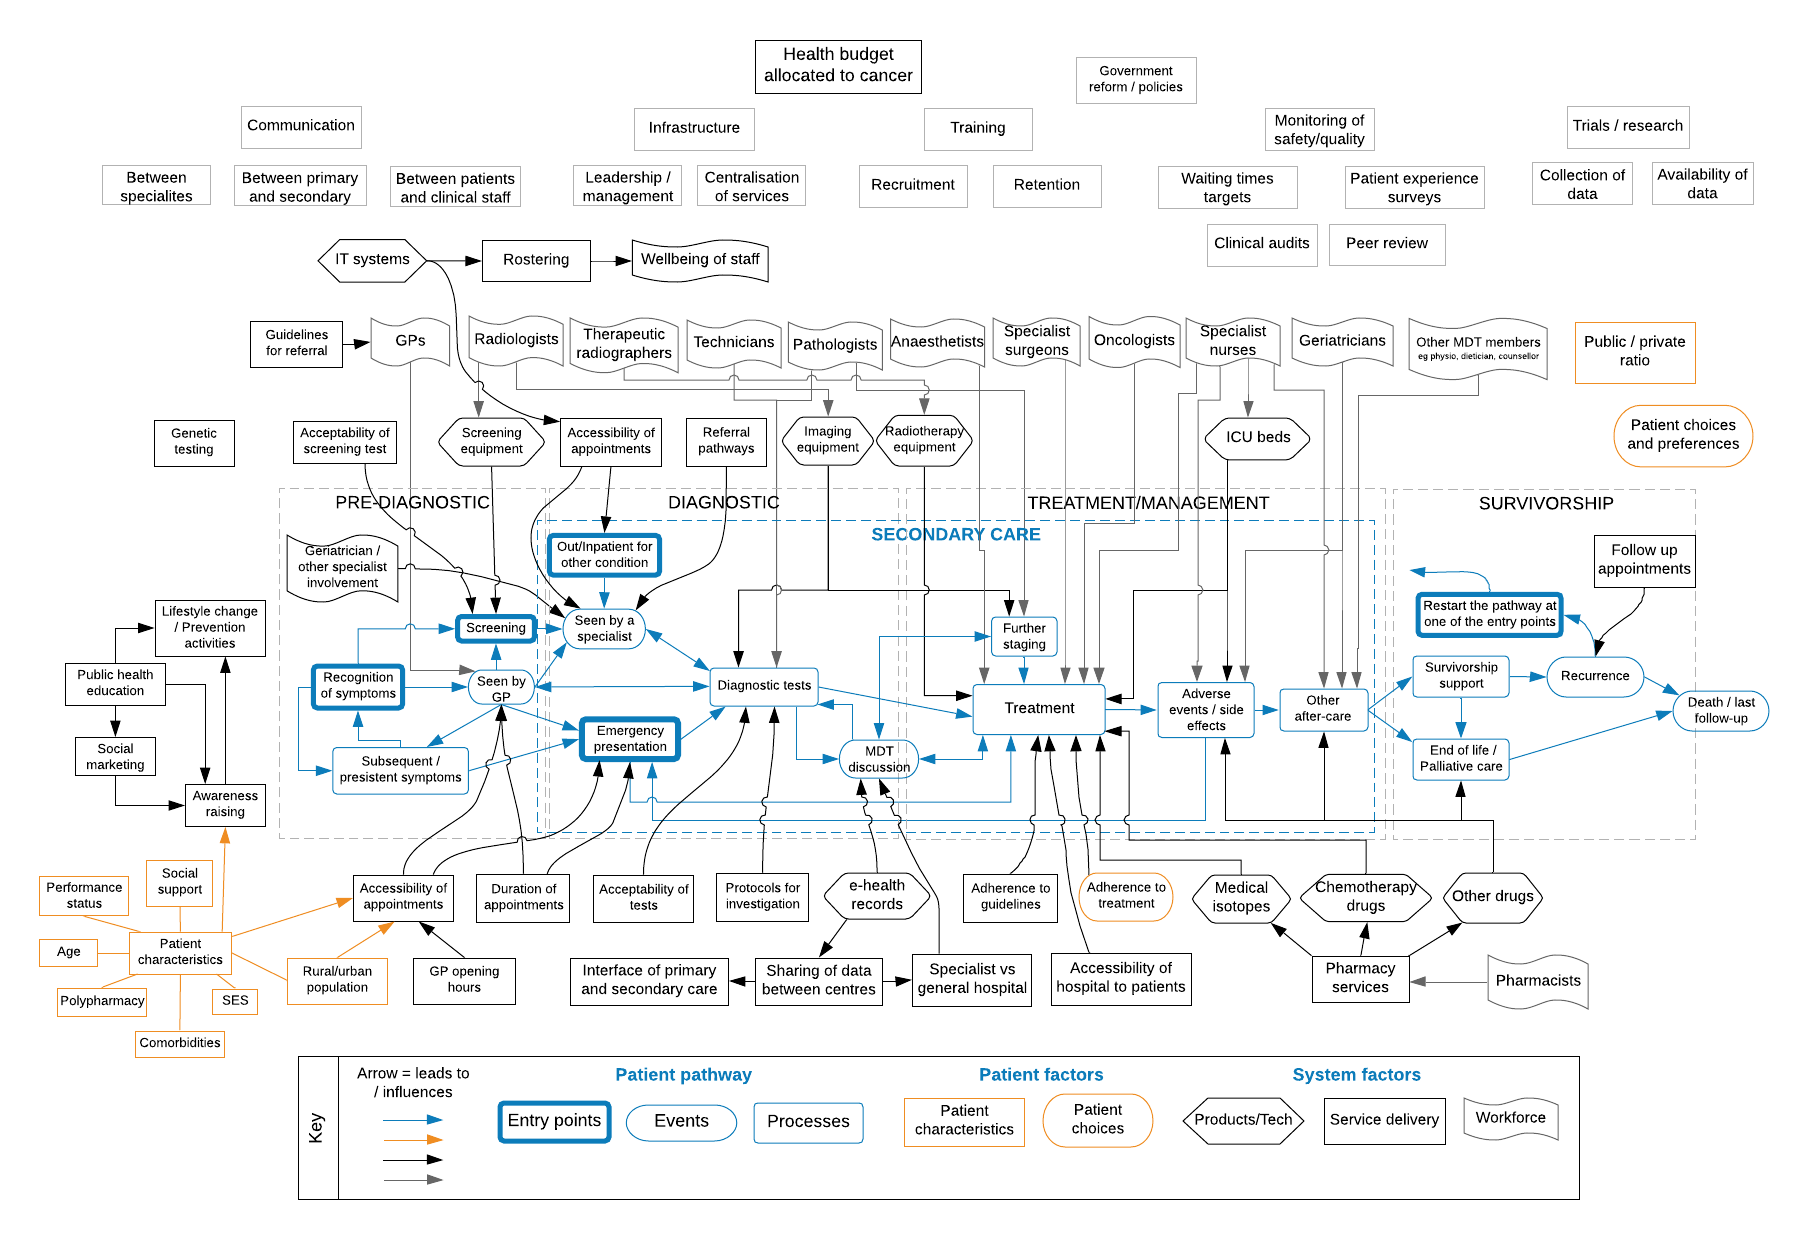 A flowchart showing the basic cancer journey and the interactions with health system factors